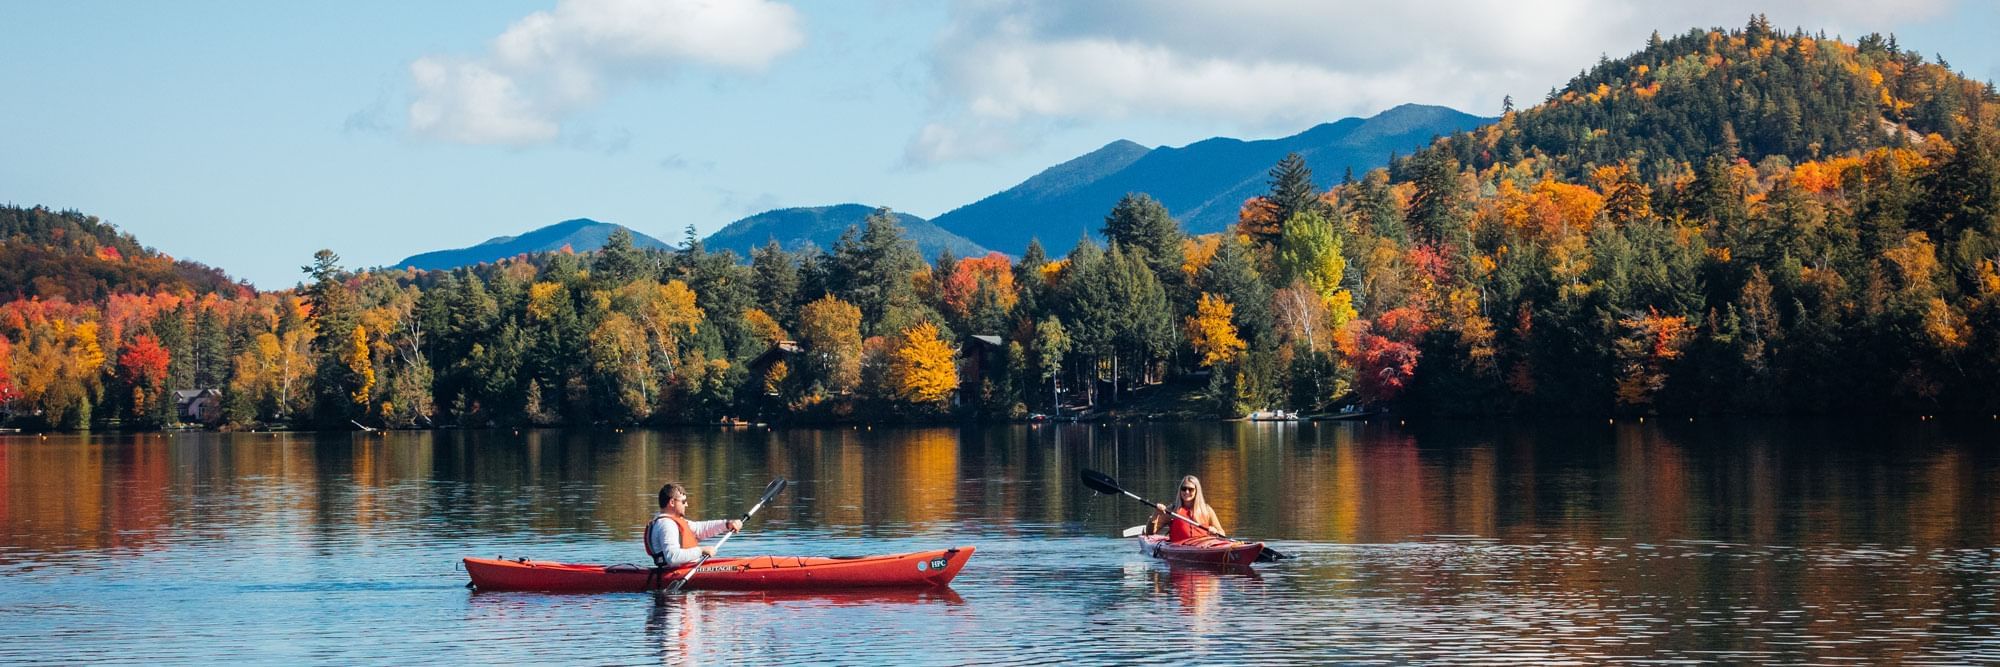 Couple kayaking on Mirror Lake surrounded by fall foliage.